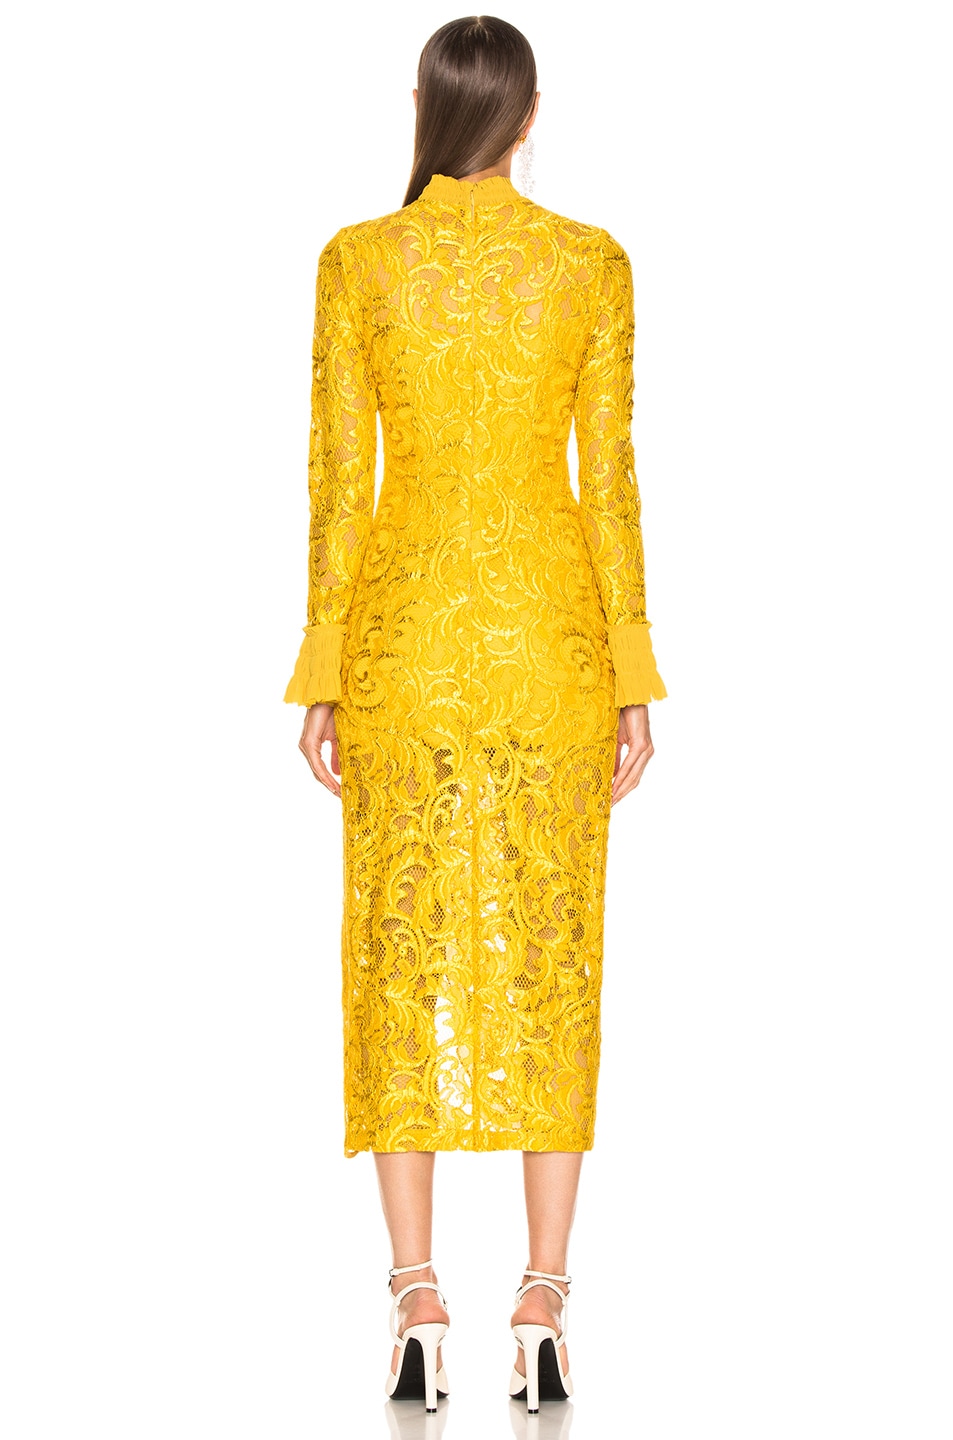 Alexis Fala Dress in Gold Lace | FWRD